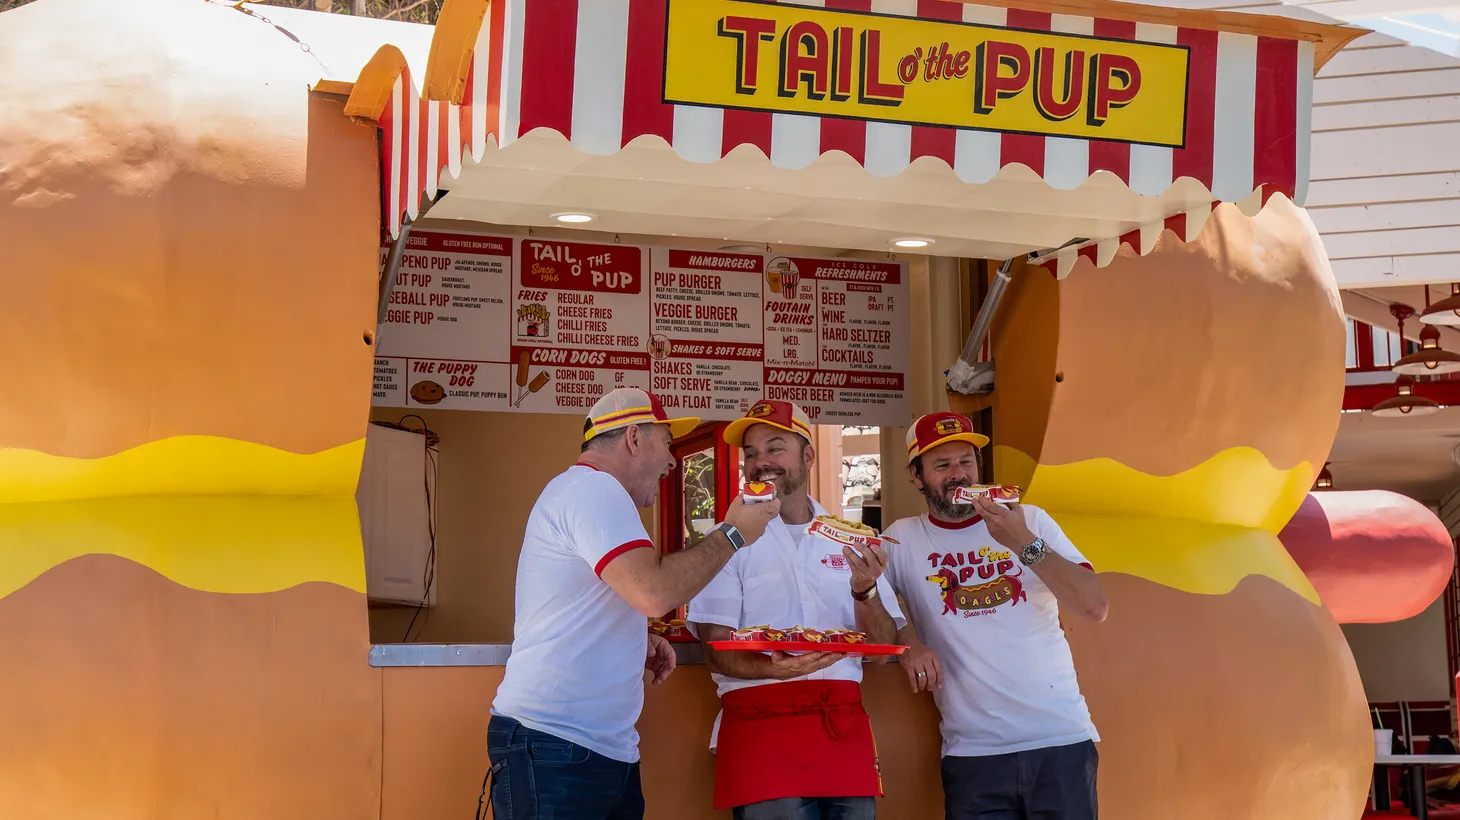 Angelenos will soon be able to enjoy hot dogs from Tail o’ the Pup once again.